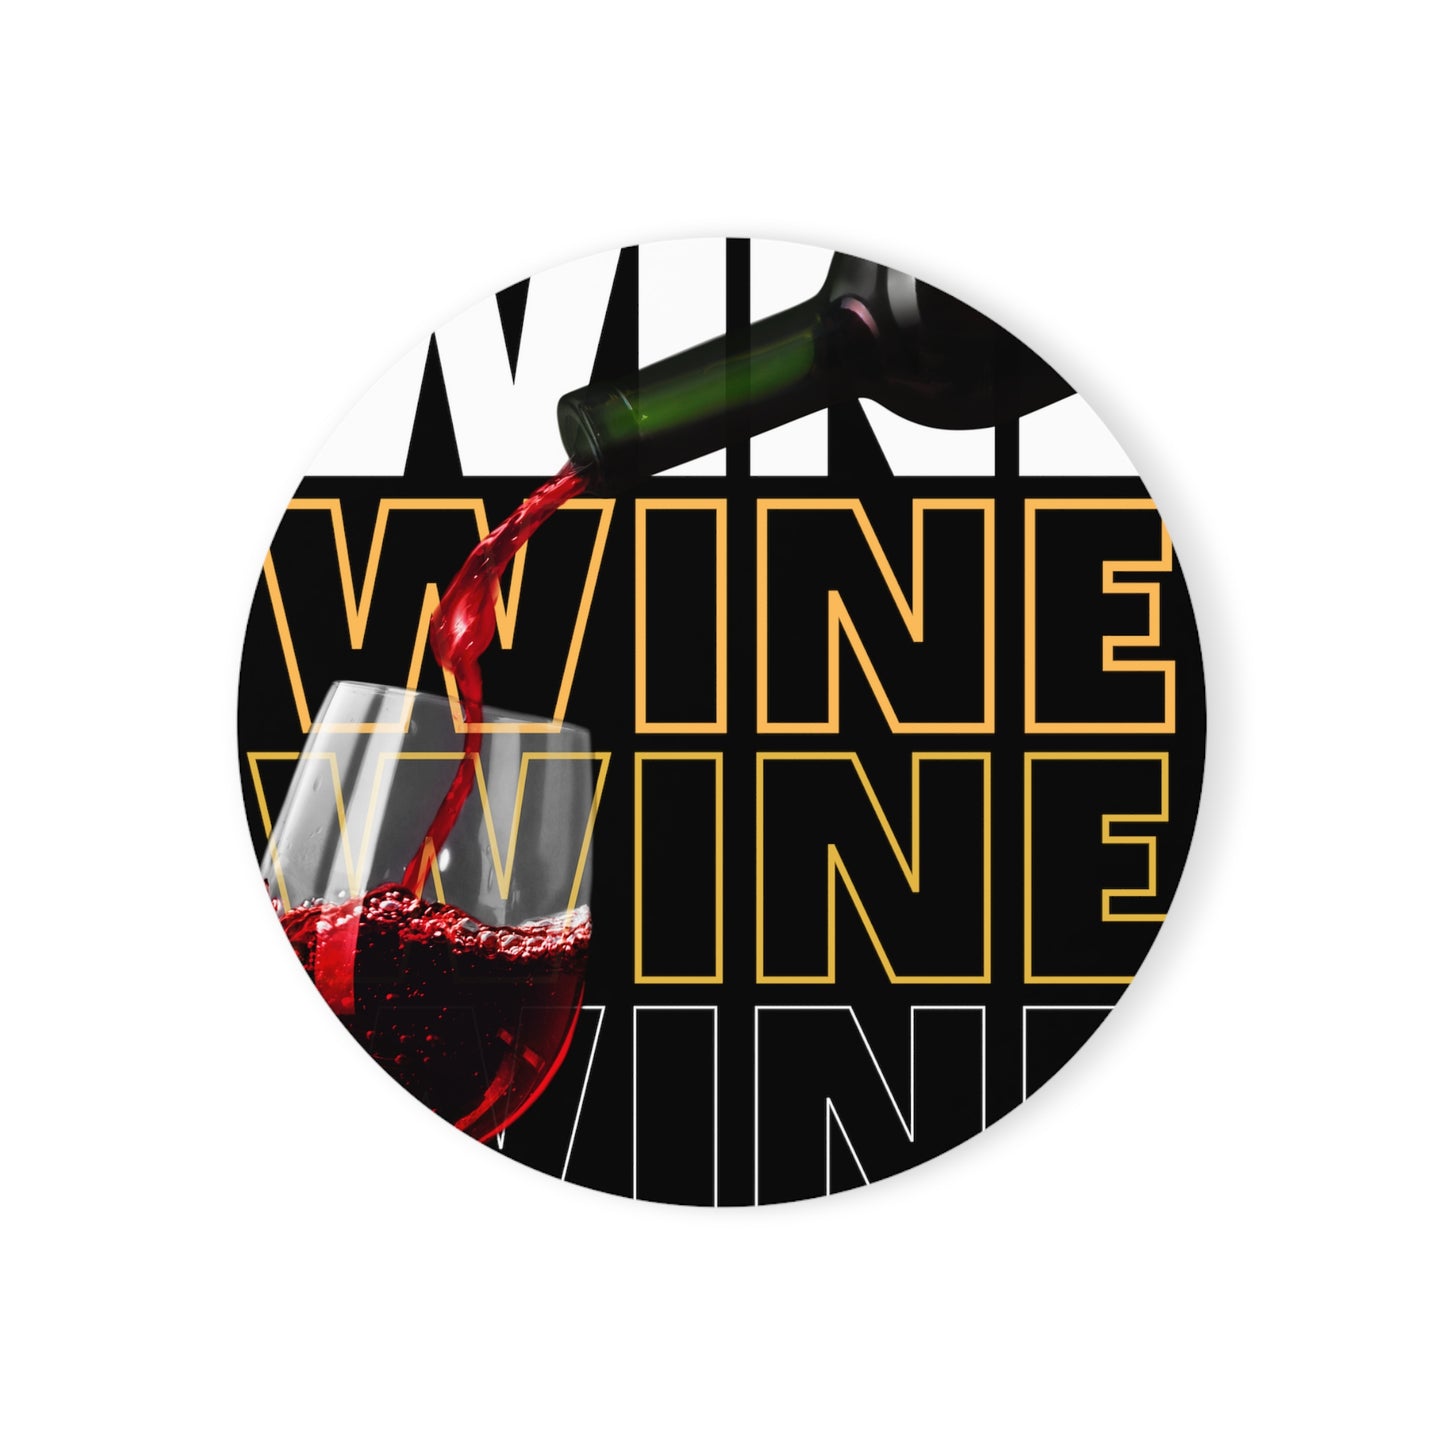 Wine, Wine, Wine Cork Back Coaster in 2 Classic Shapes! Share your love of wine with your friends and family